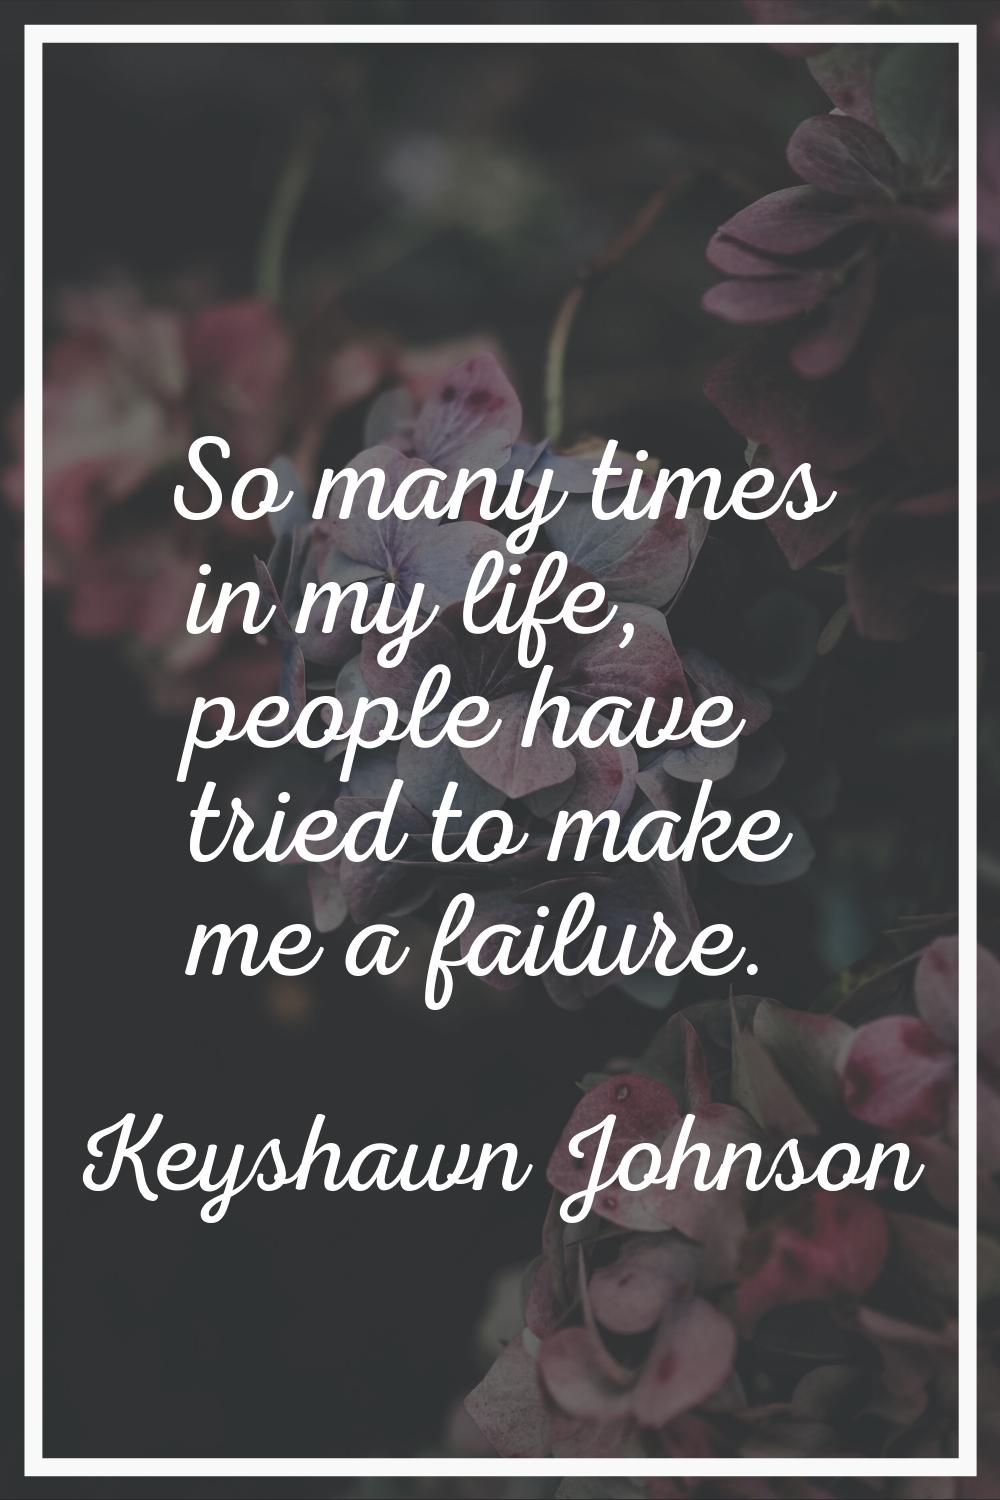 So many times in my life, people have tried to make me a failure.